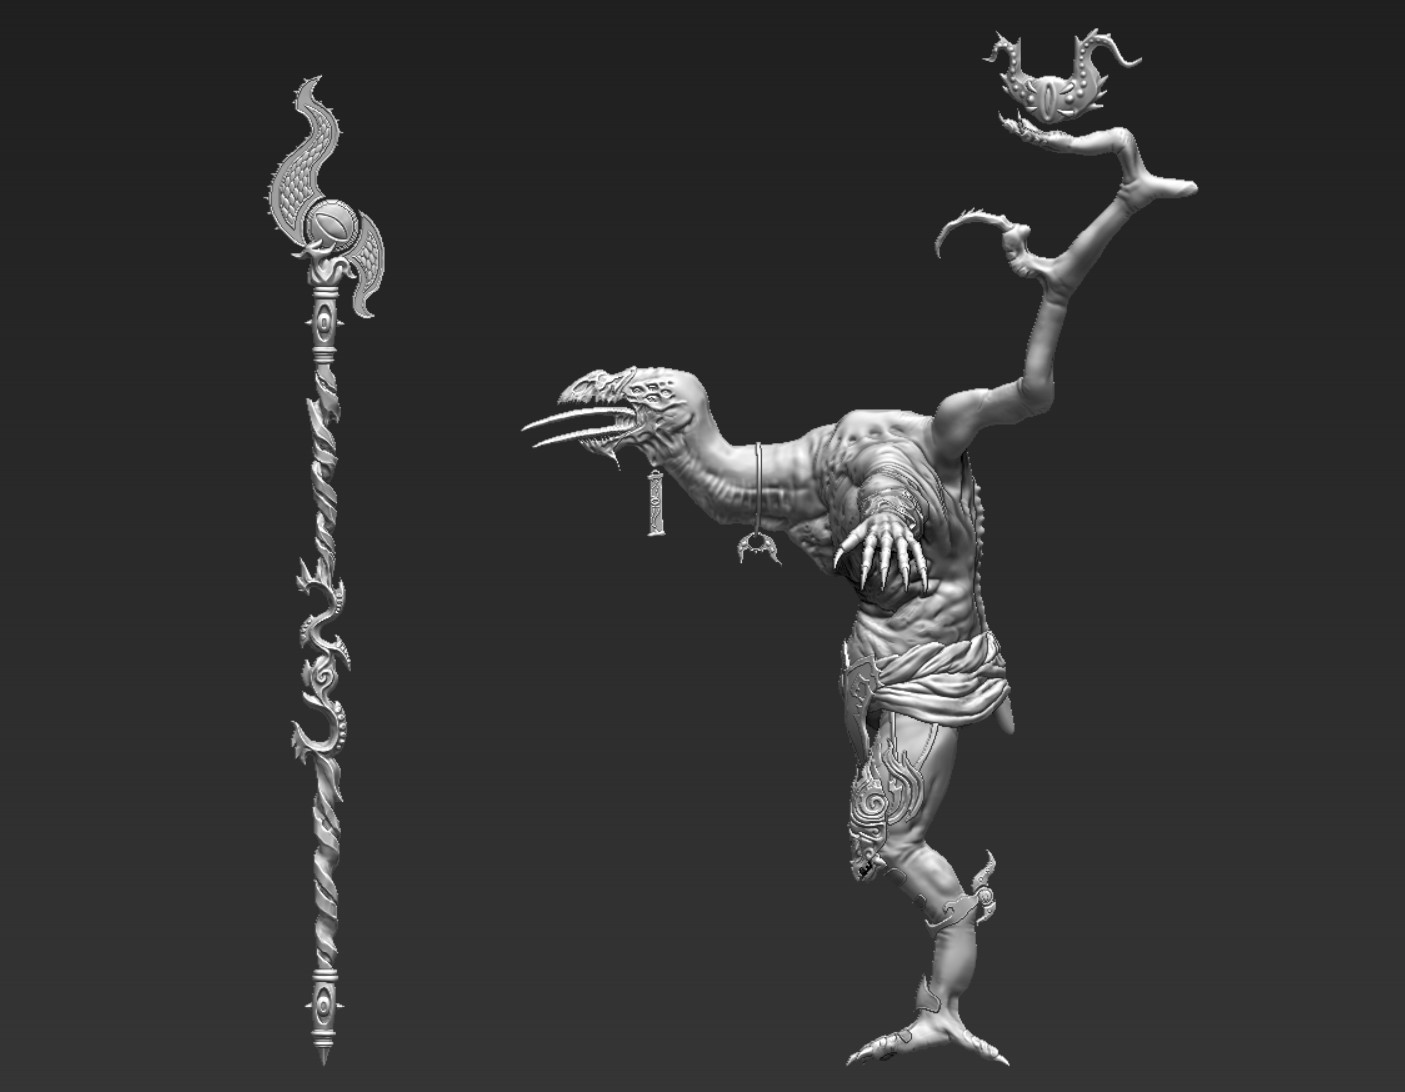 Lord of Change - Warhammer - T-pose - 3D model by Max.H.A.J (@Max.H.A.J)  [04b04b6]